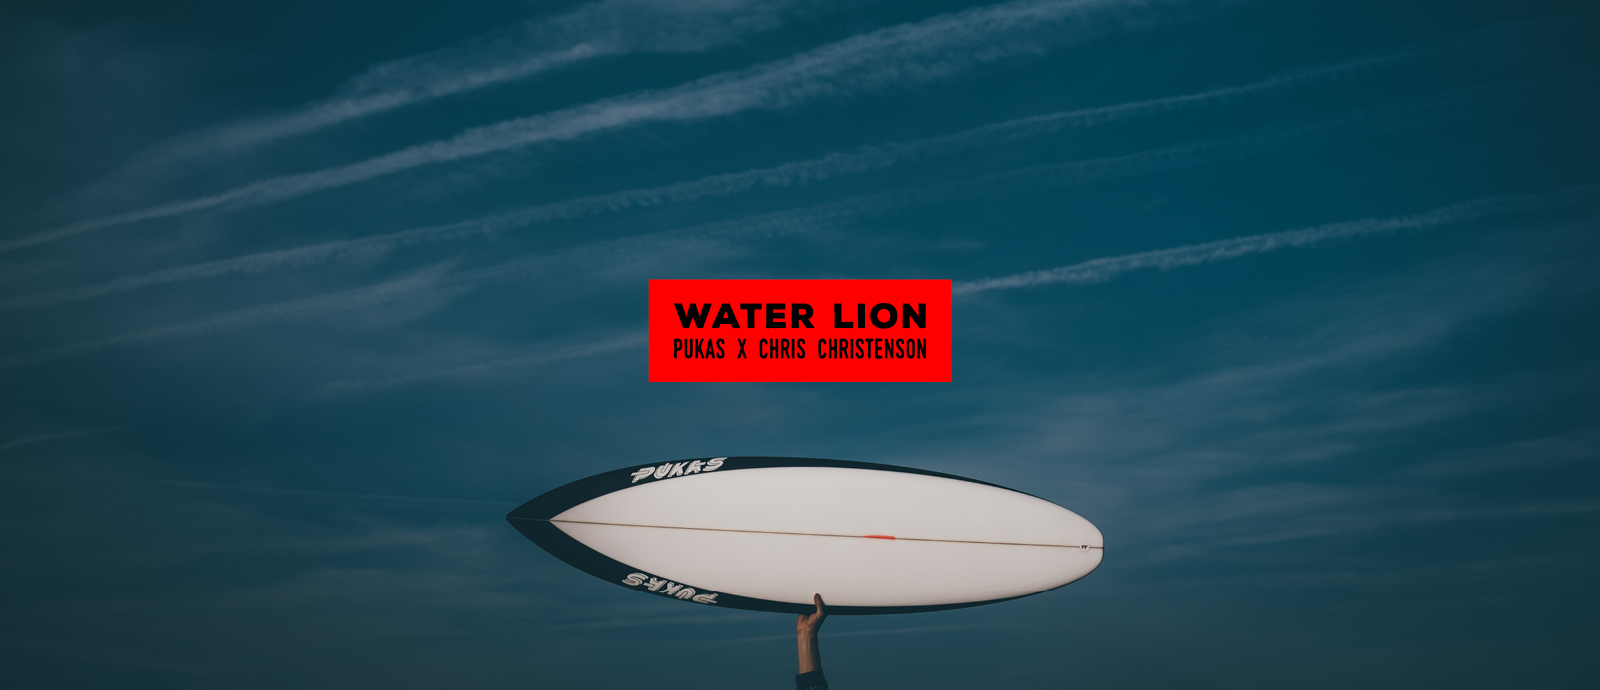 Pukas Surf Water Lion by Chris Christenson